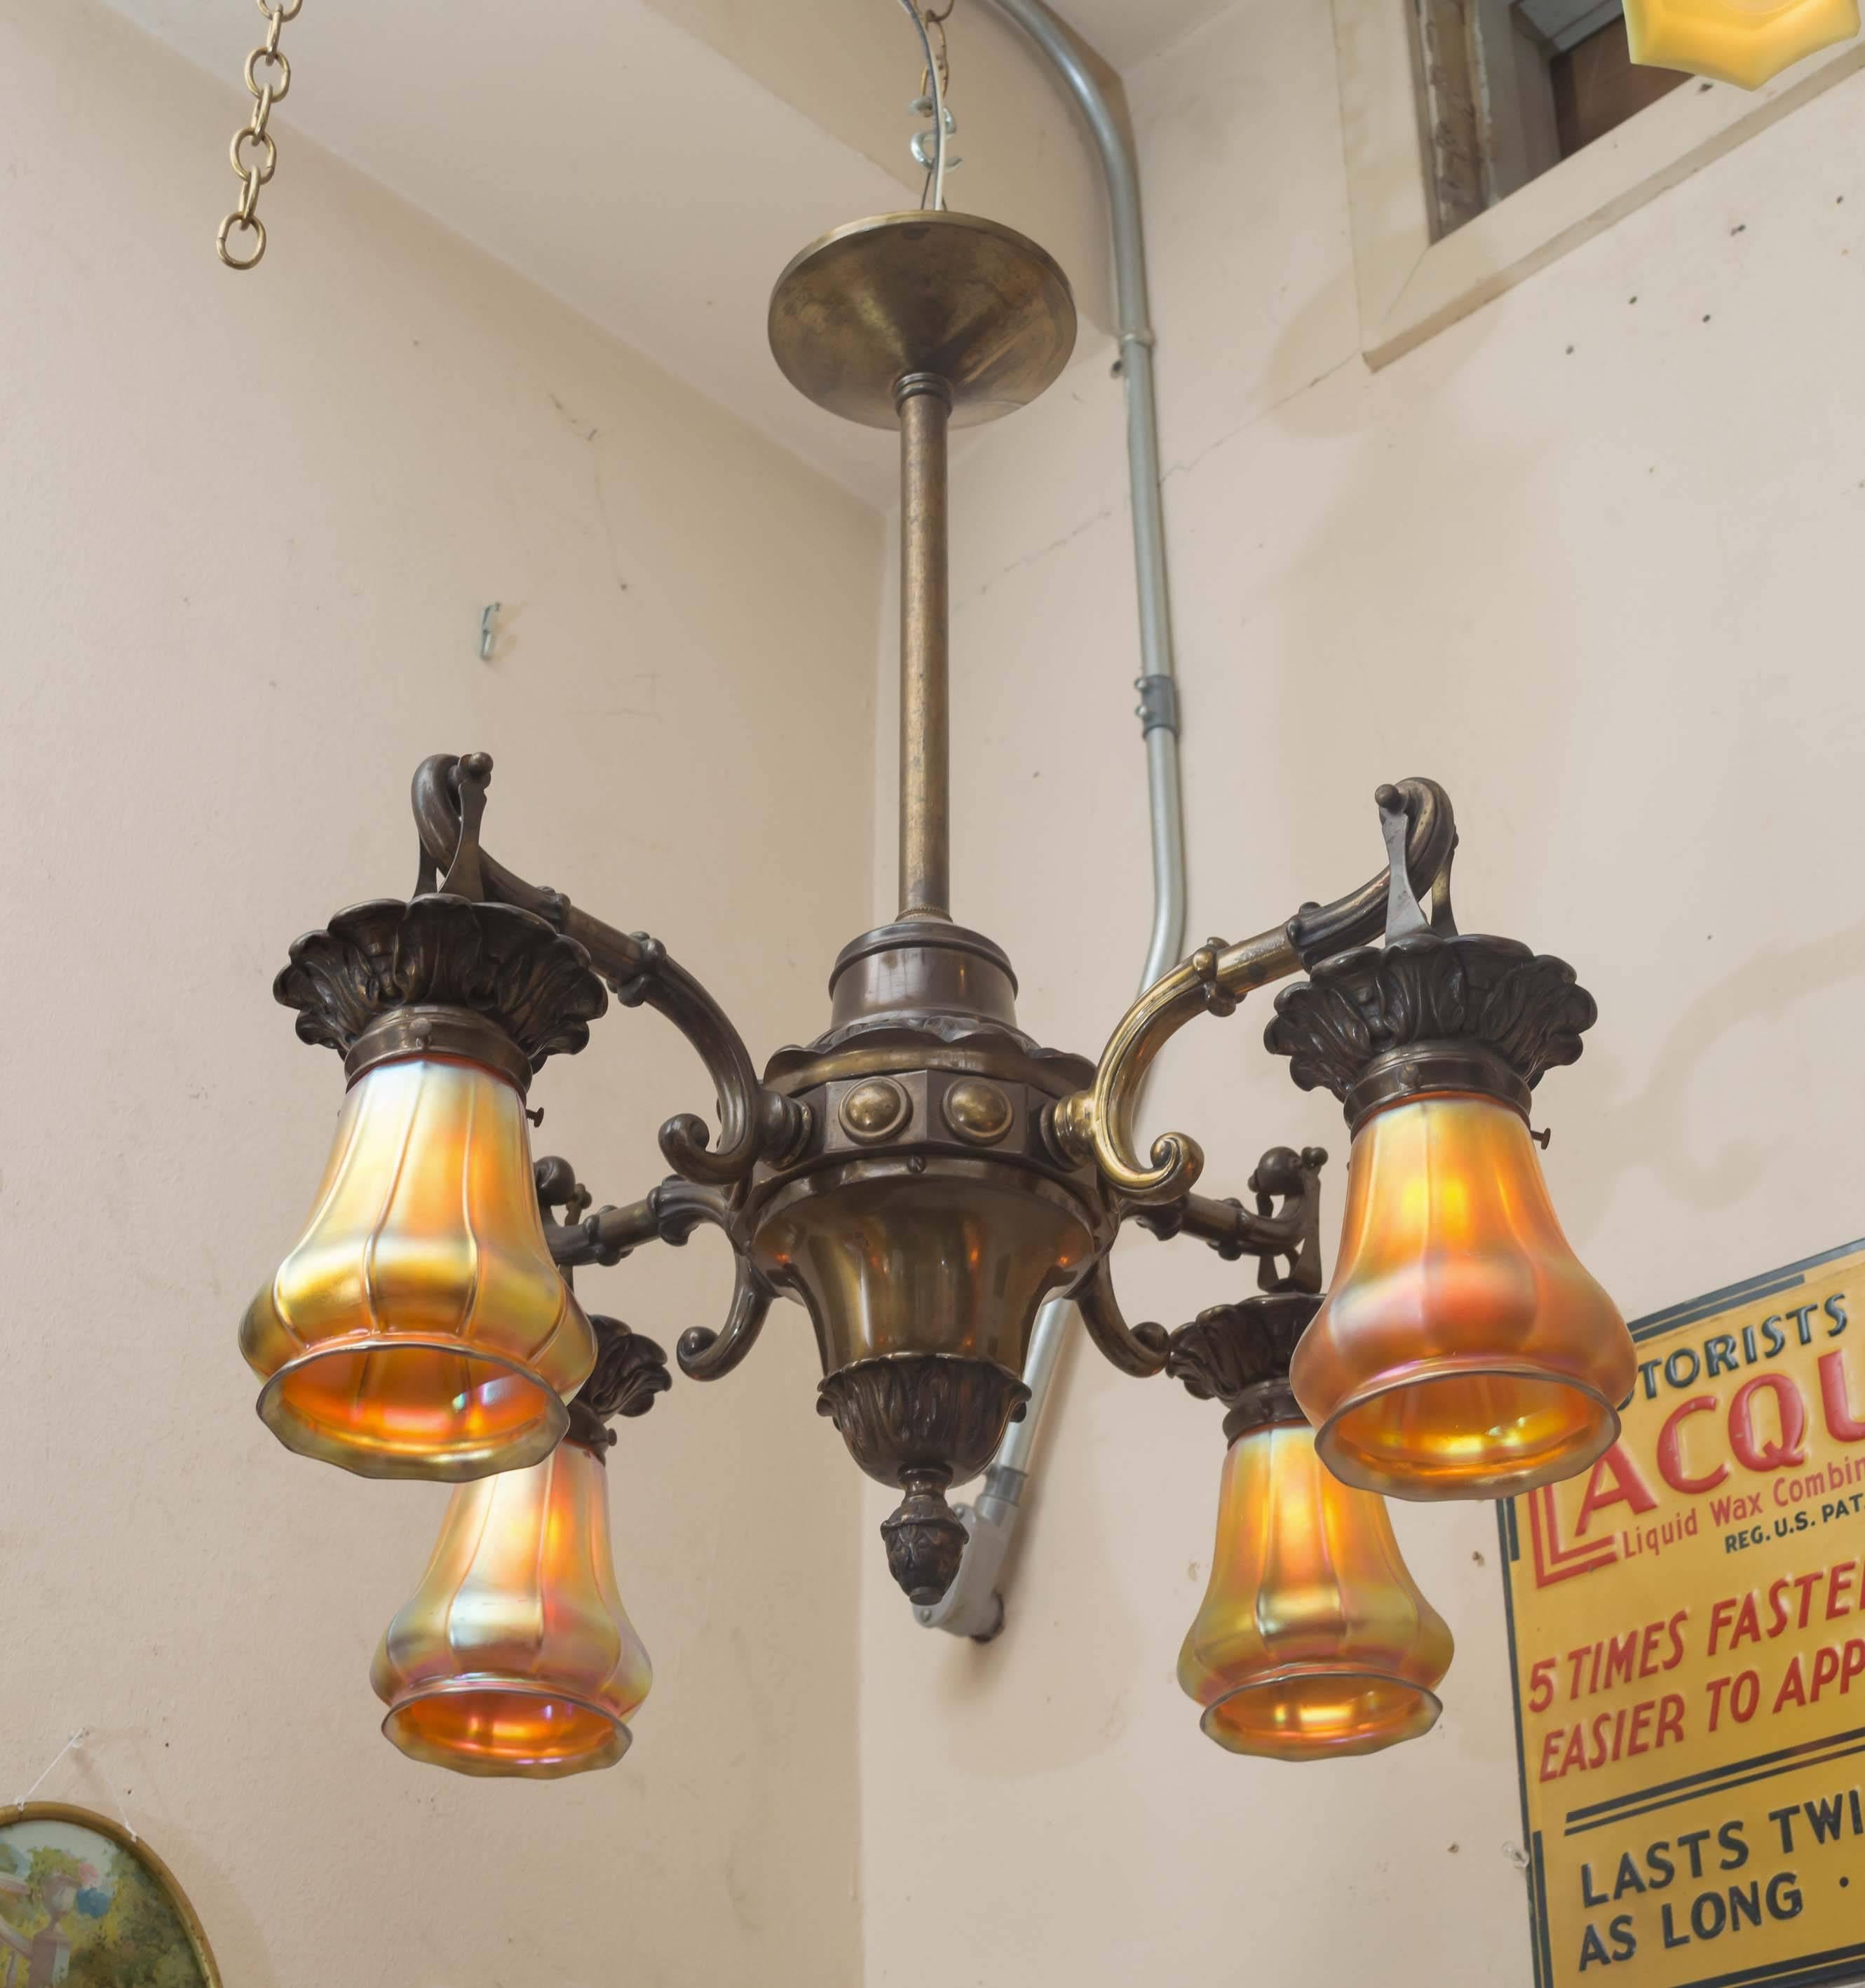 This very handsome four-arm chandelier is a fine example of quality craftsmanship that has long since disappeared. To enhance the beauty of this light there are four Steuben glass shades, and a wonderful warm original patina on the metal.